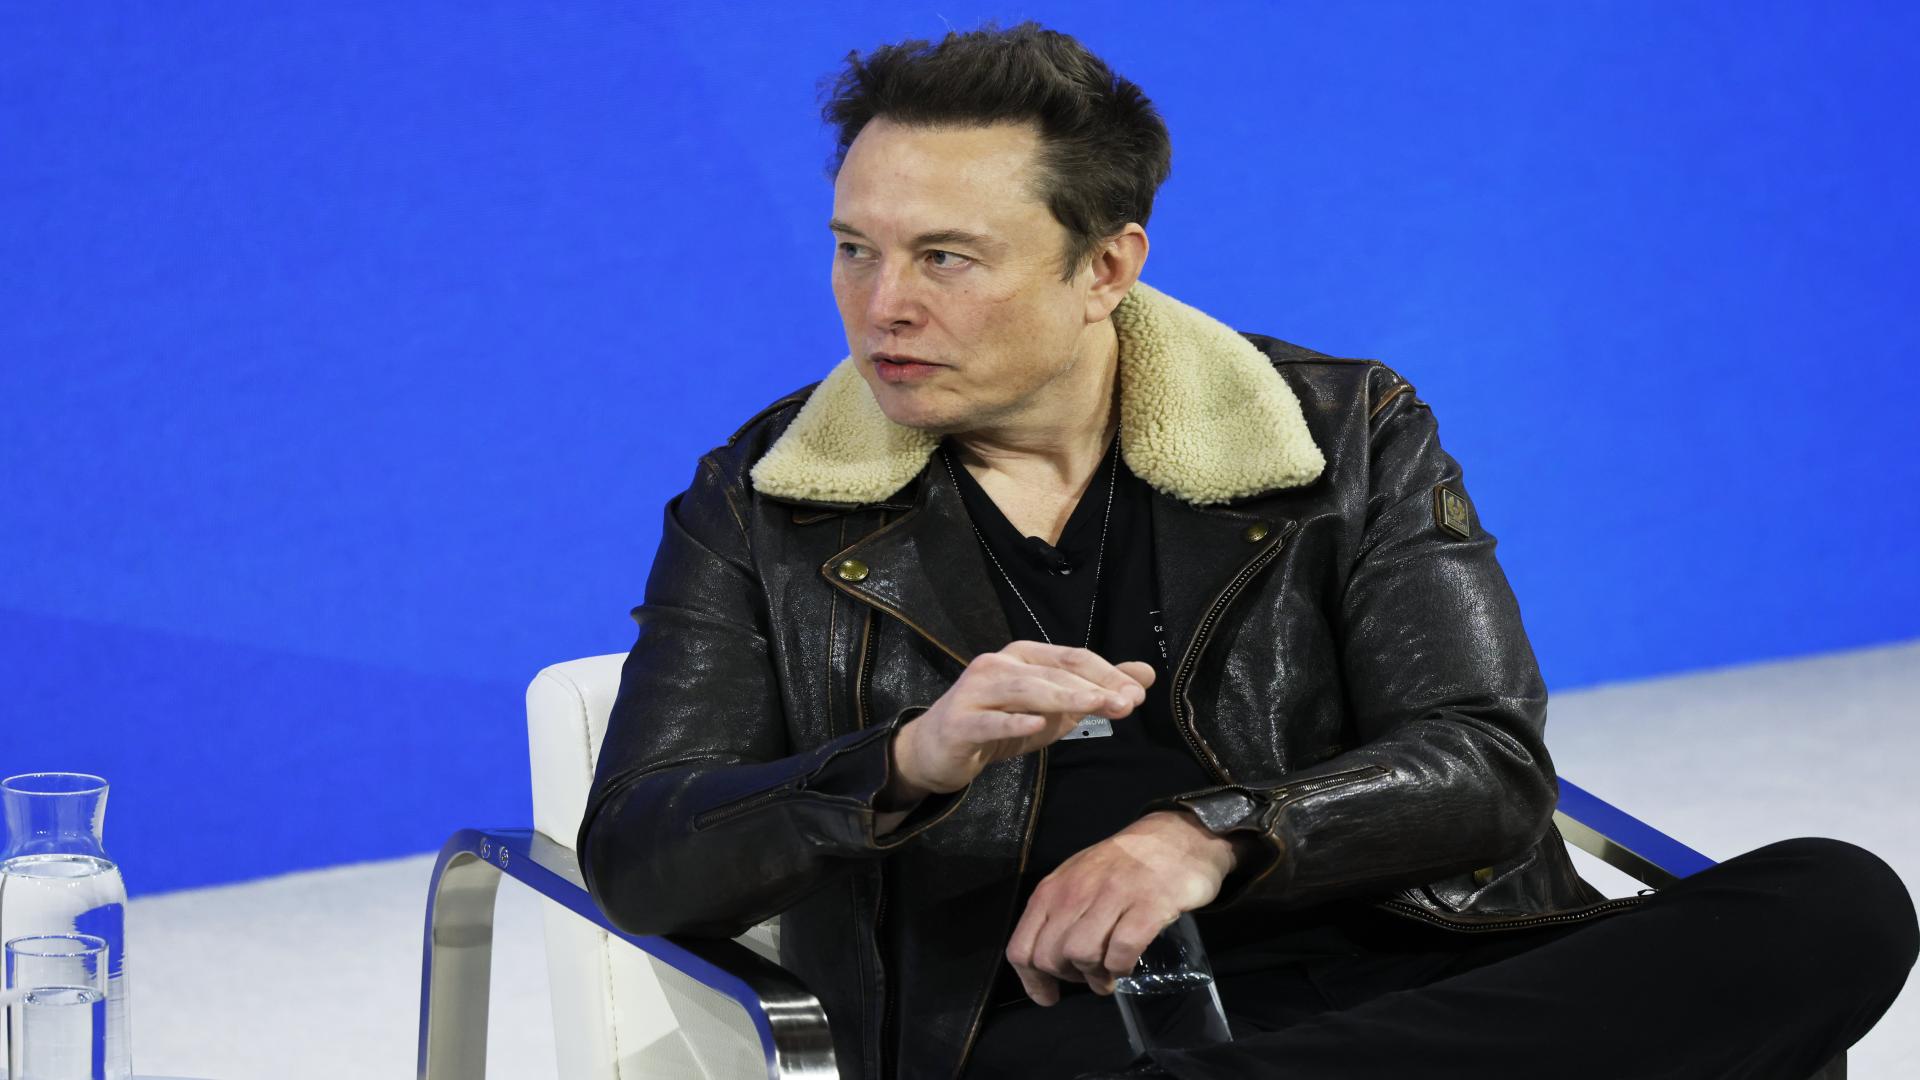 Elon Musk claims advertisers are trying to 'blackmail' him, says 'Go f--- yourself'